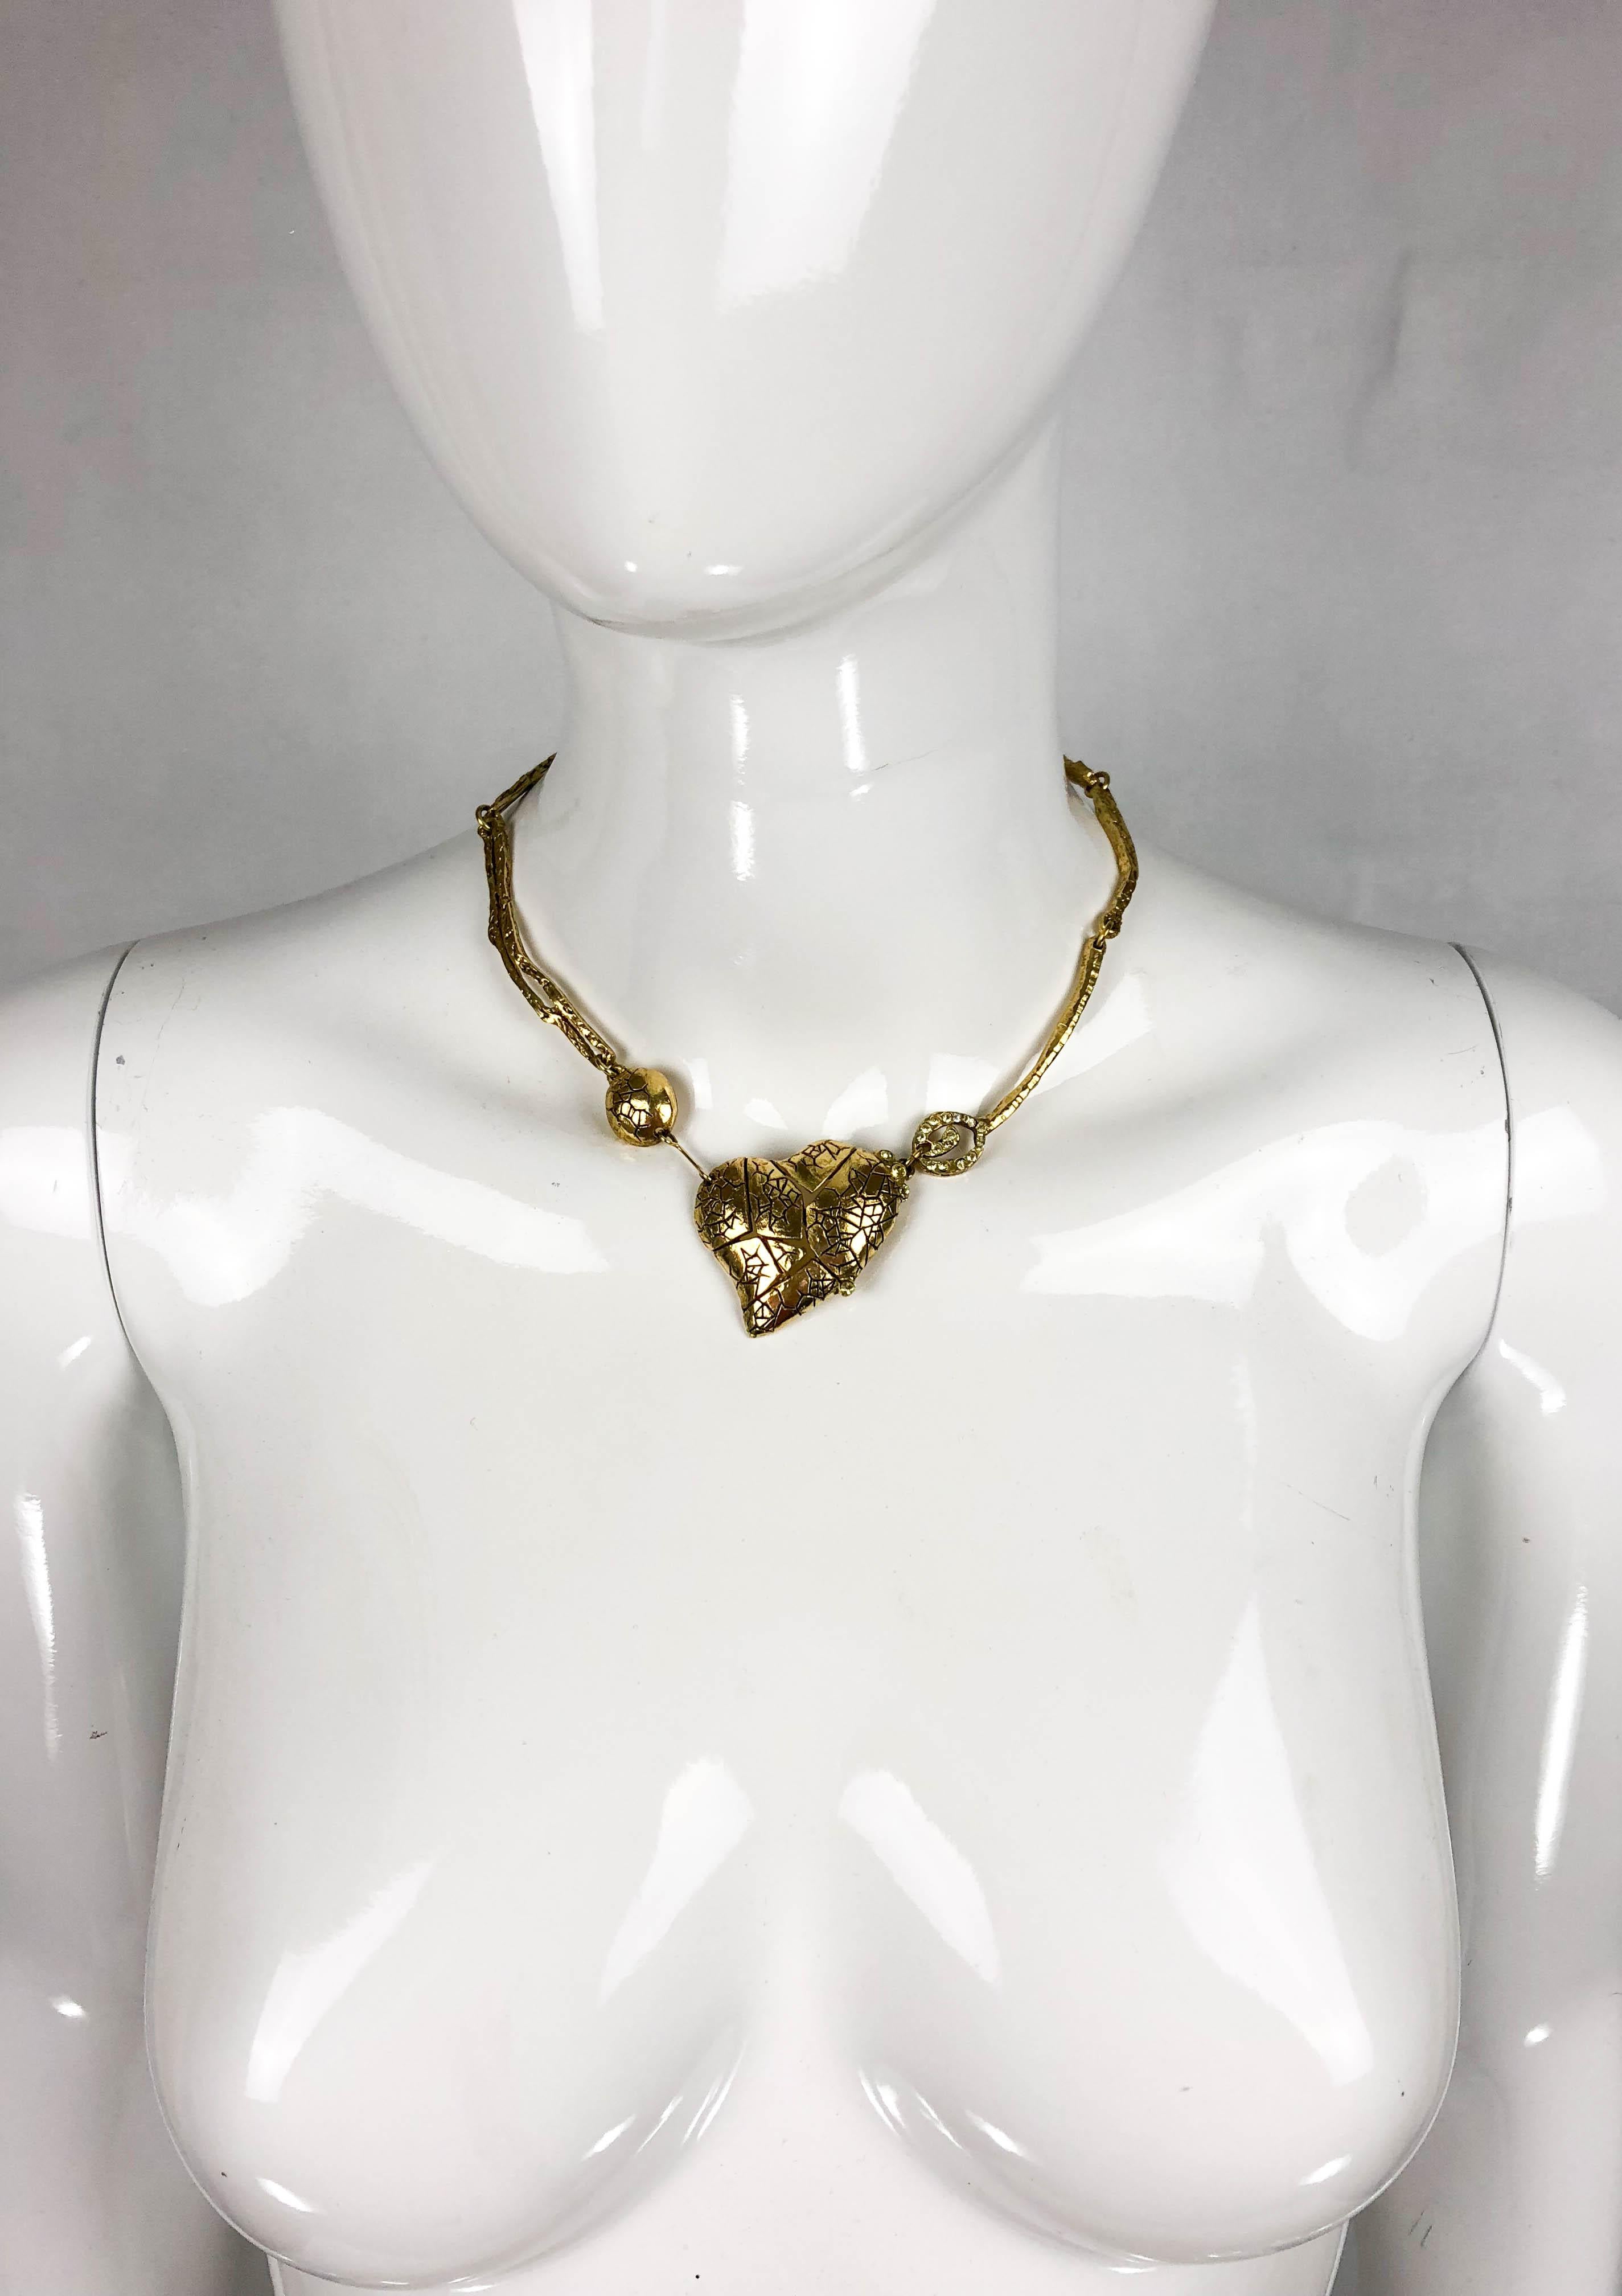 Christian Lacroix Gold-Plated Heart Necklace. This beautiful piece by Lacroix dates back from the 1990’s. Made in gold-plated metal and with an organic feel to it, it has the heart its main feature. Bringing in the quirkiness that Christian Lacroix